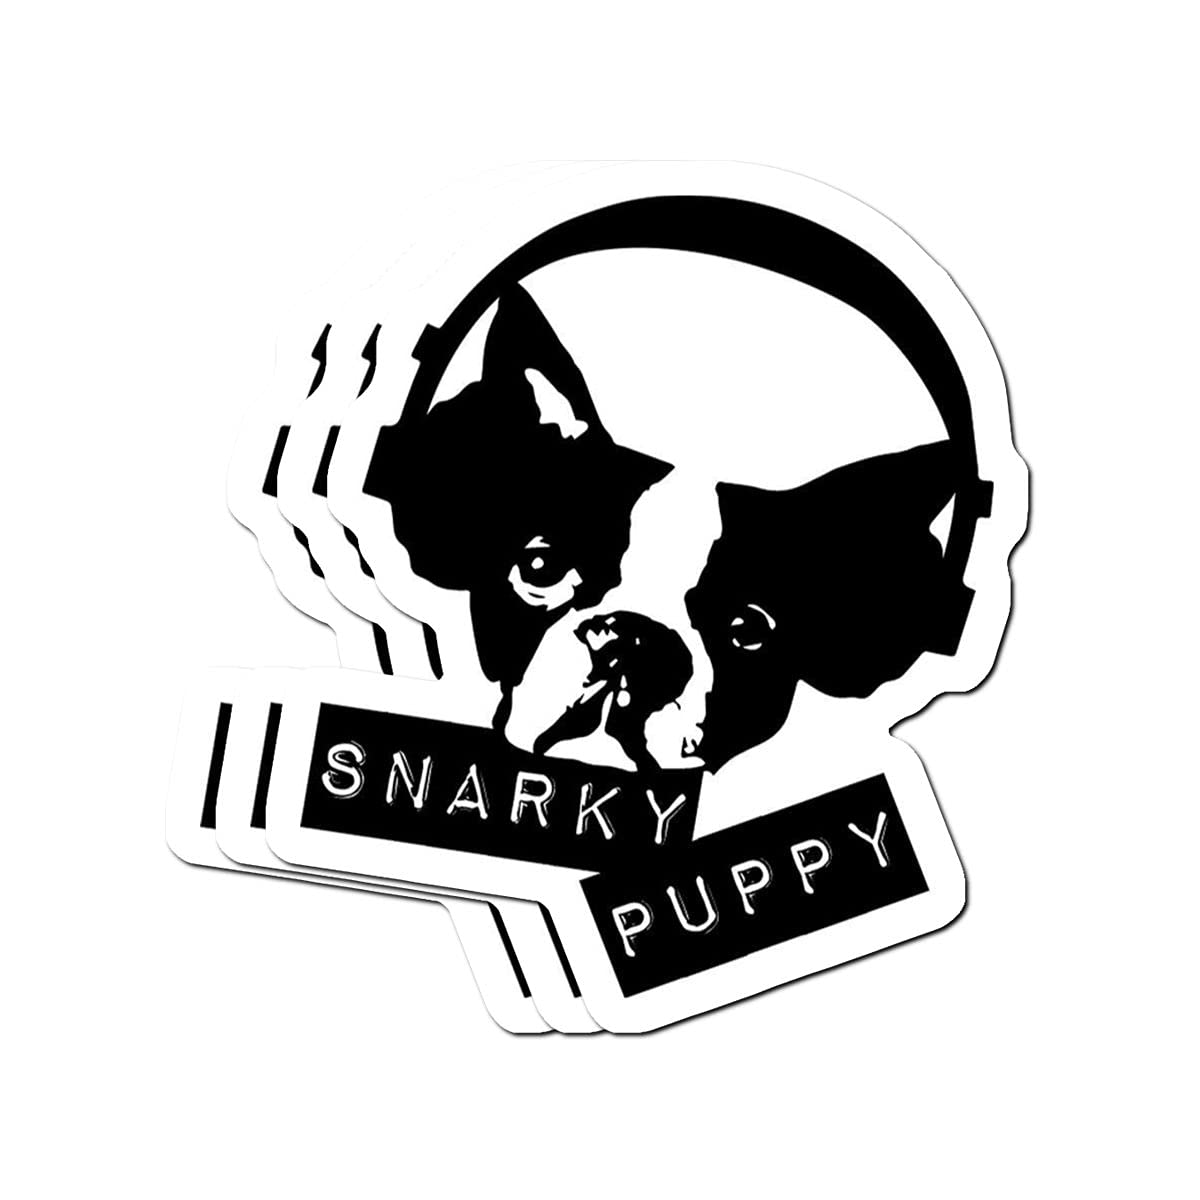 Big Lens Store Snarky Puppy Logo HD Stickers (3 Pcs Pack), Sports & Outdoors